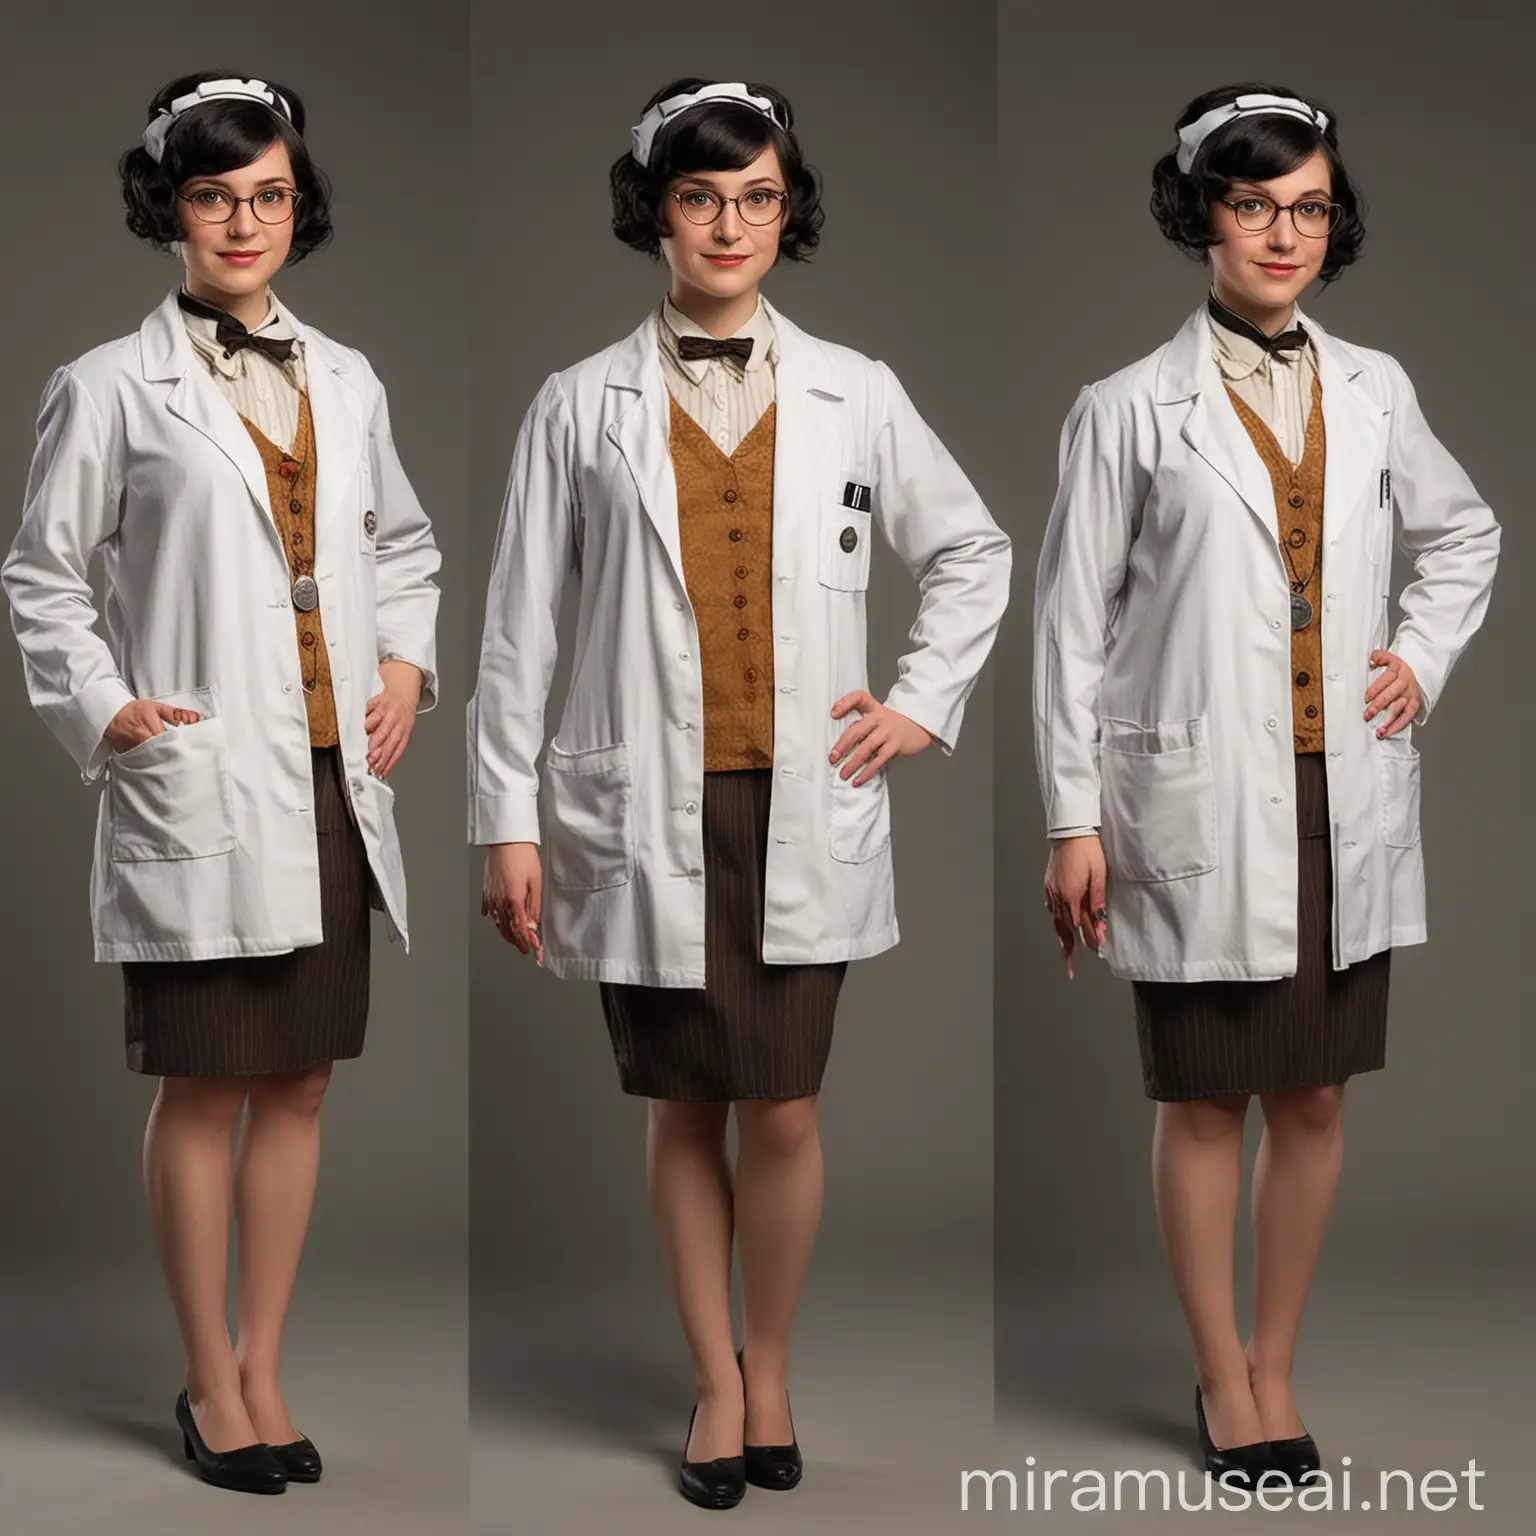 Abigail Sciuto Cosplaying as a 1920s Doctor